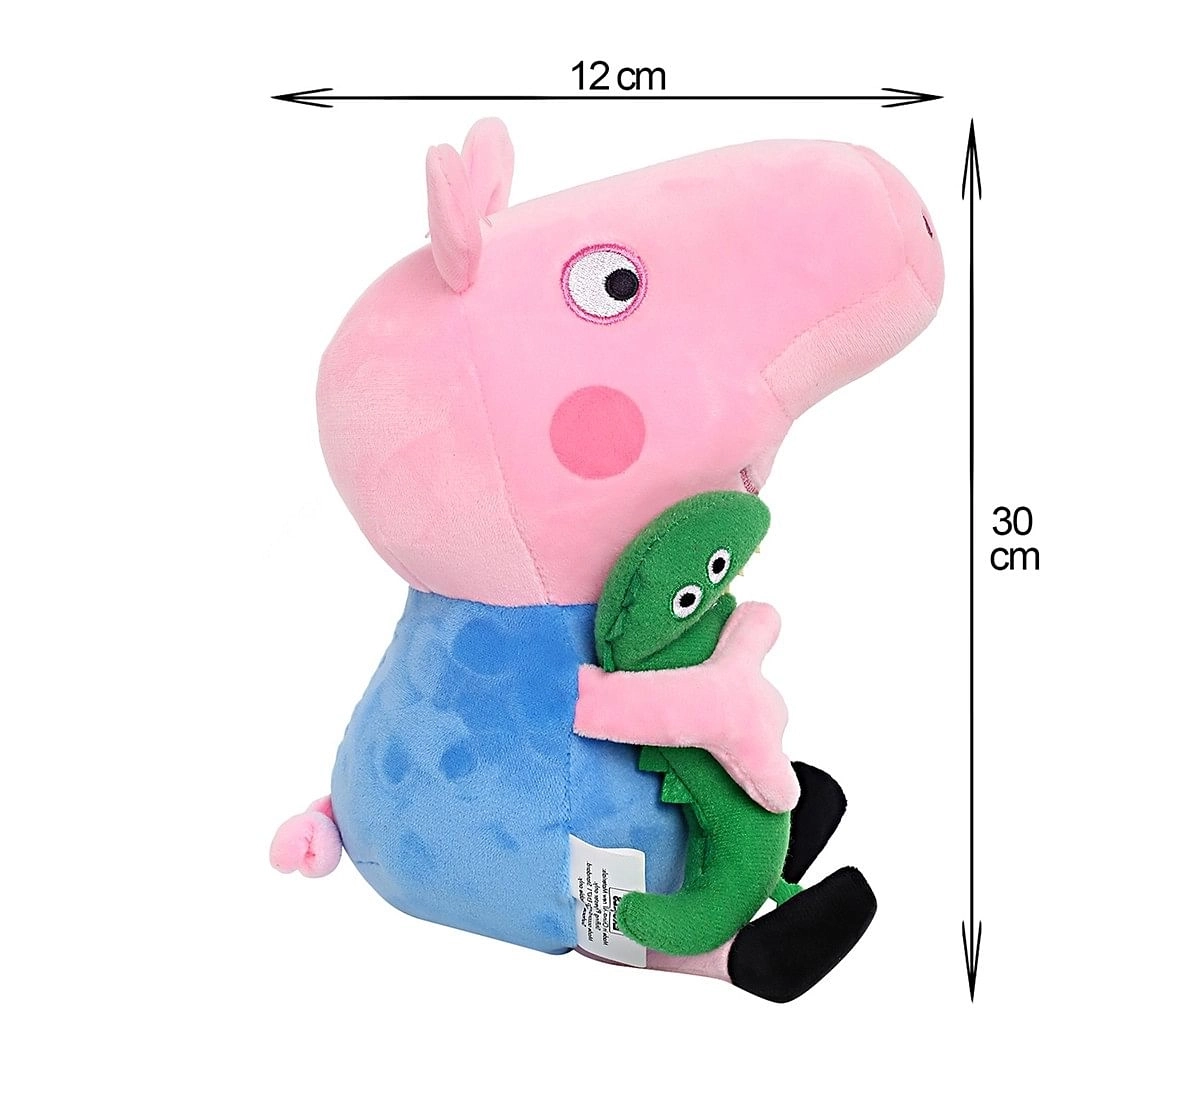 Peppa George Pig with Dinosaur 30cm Soft Toy for Kids 2Y+, Blue